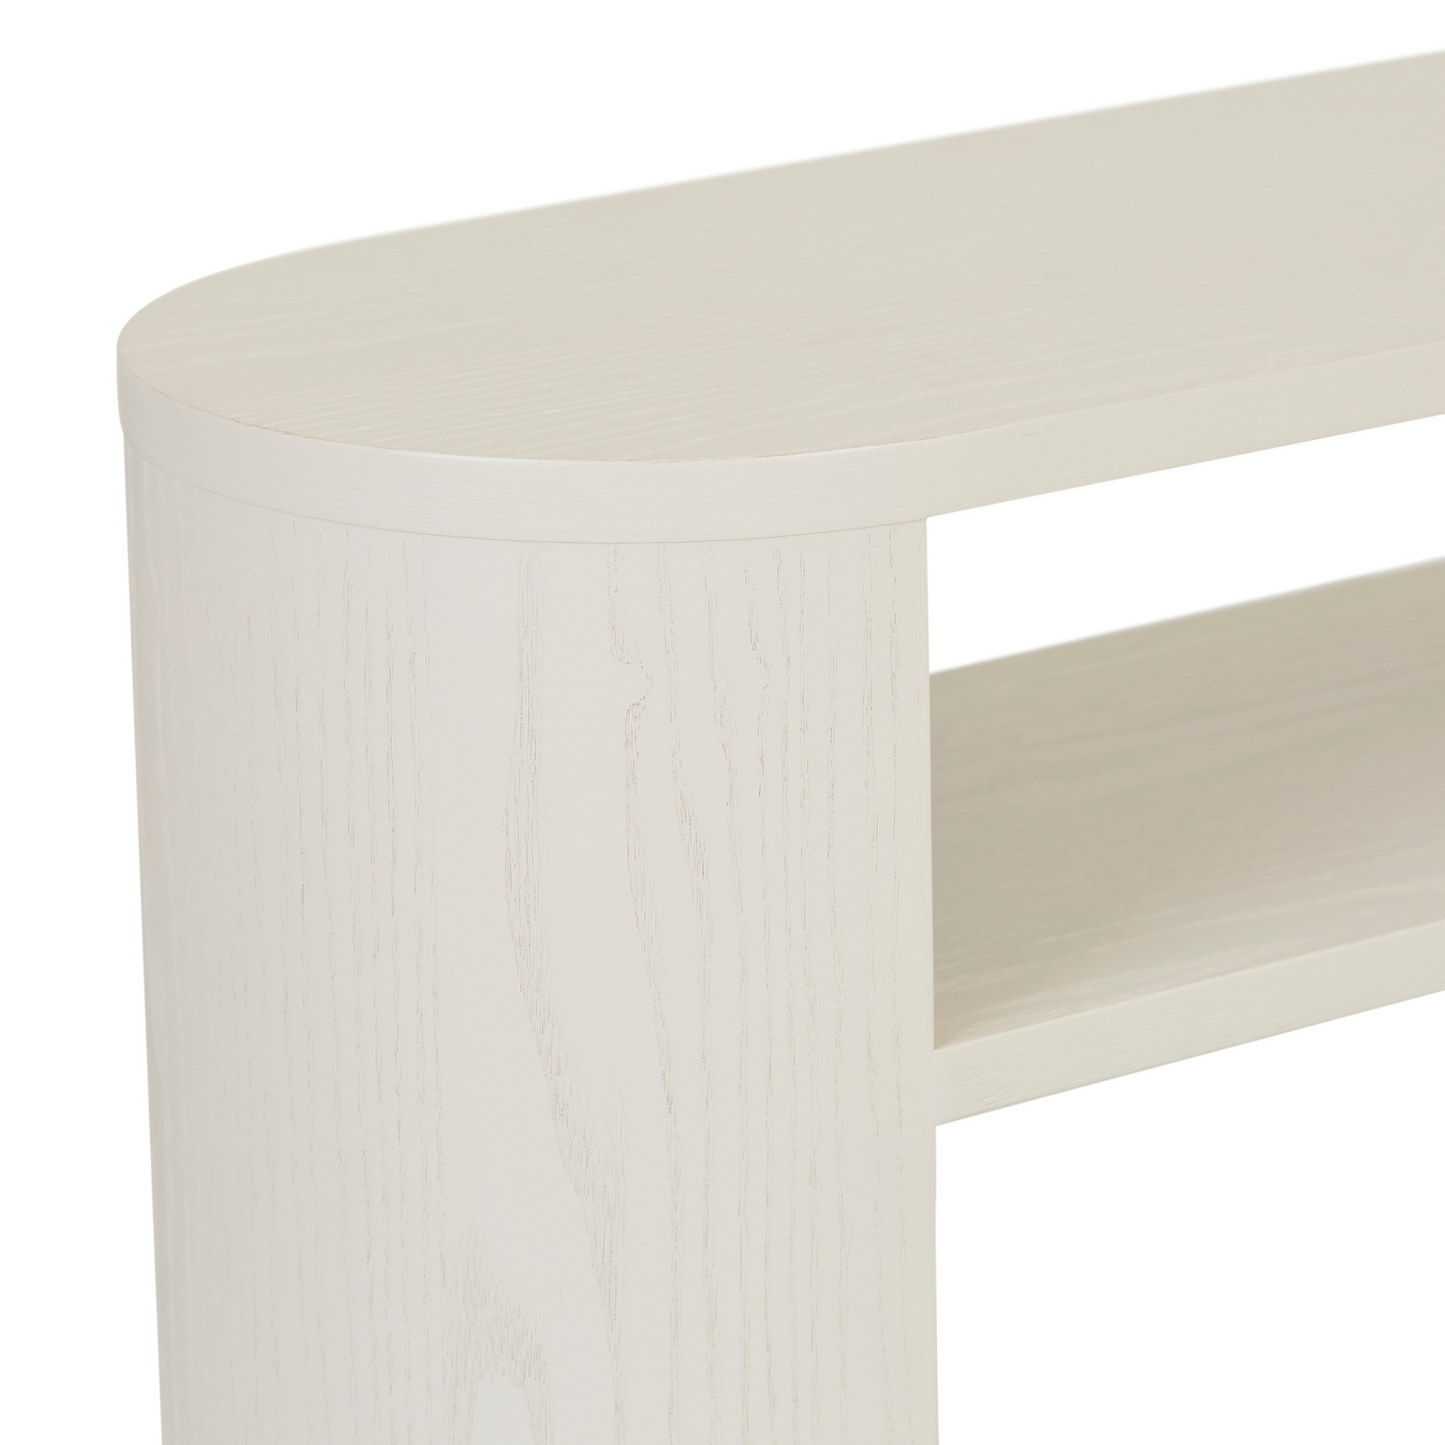 Classique Oval Small Shelf Console by Globewest